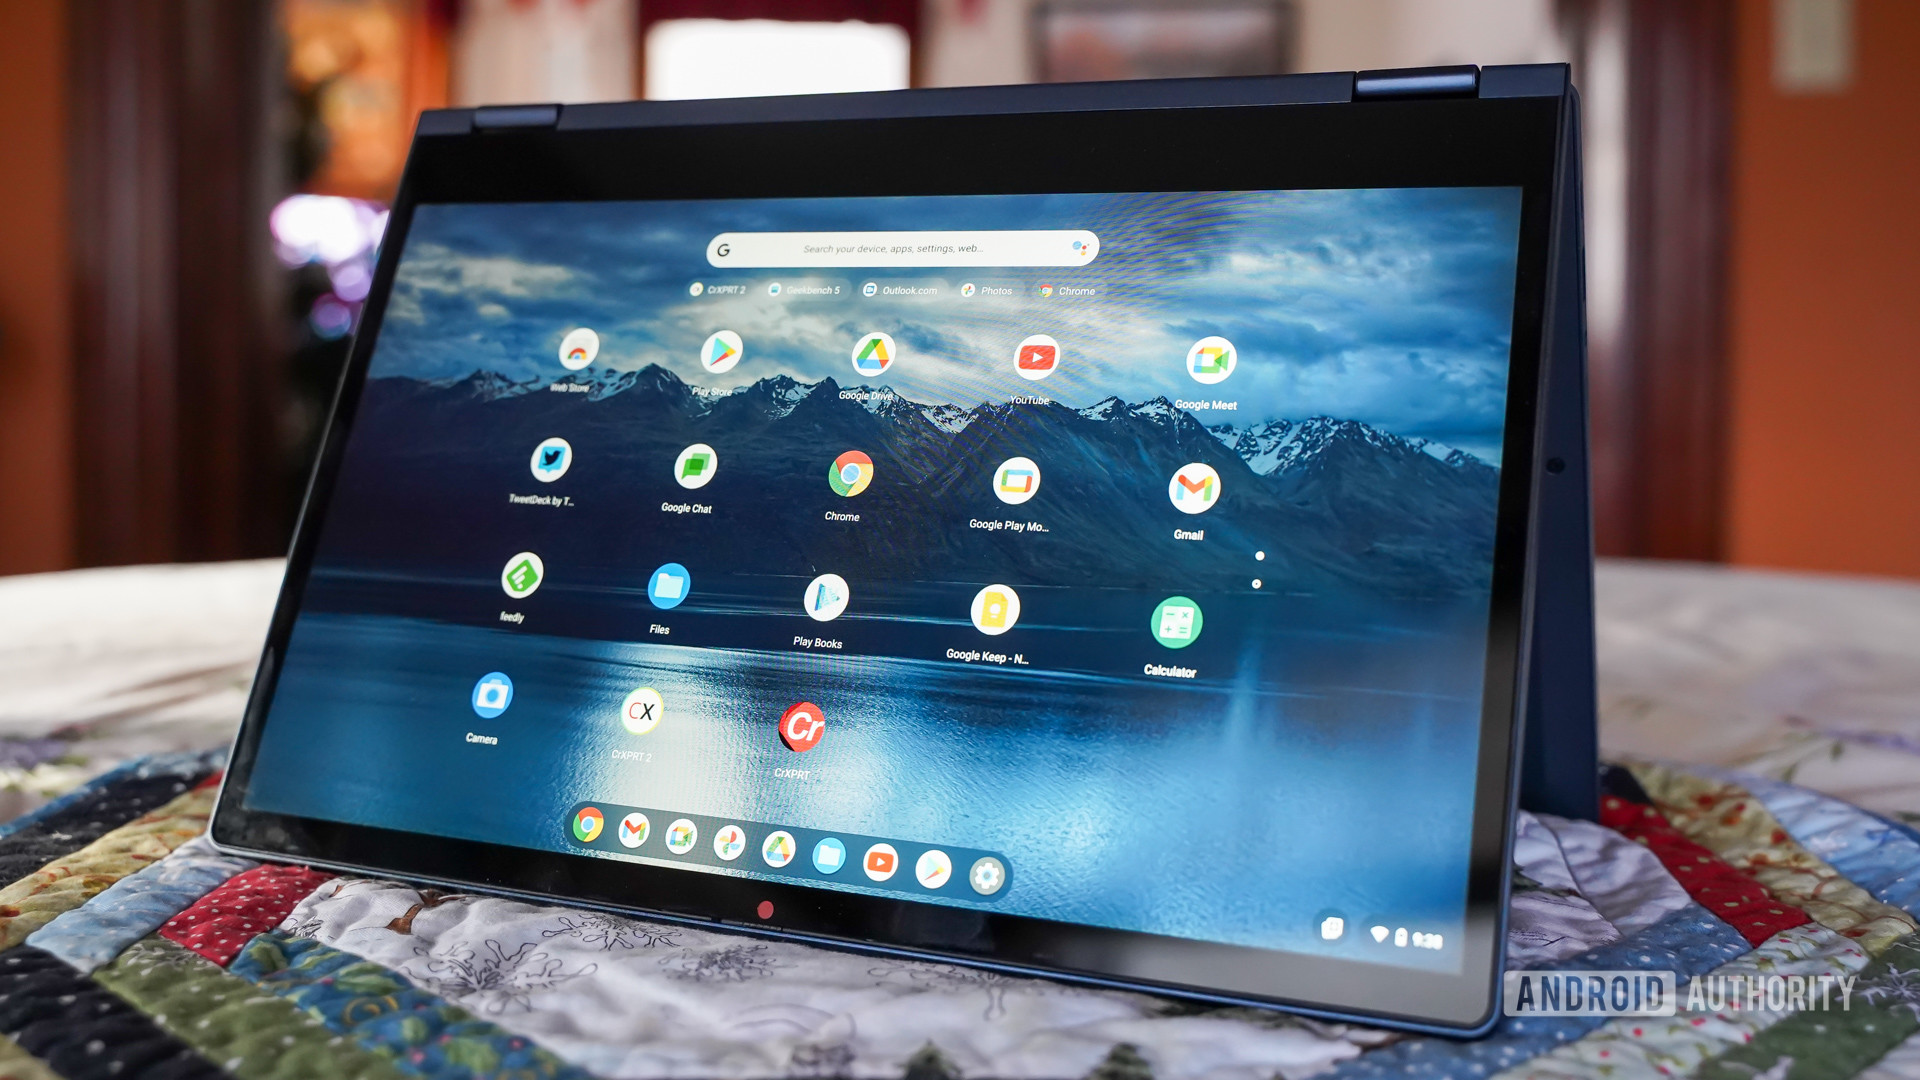 How to save images on a Chromebook - Android Authority